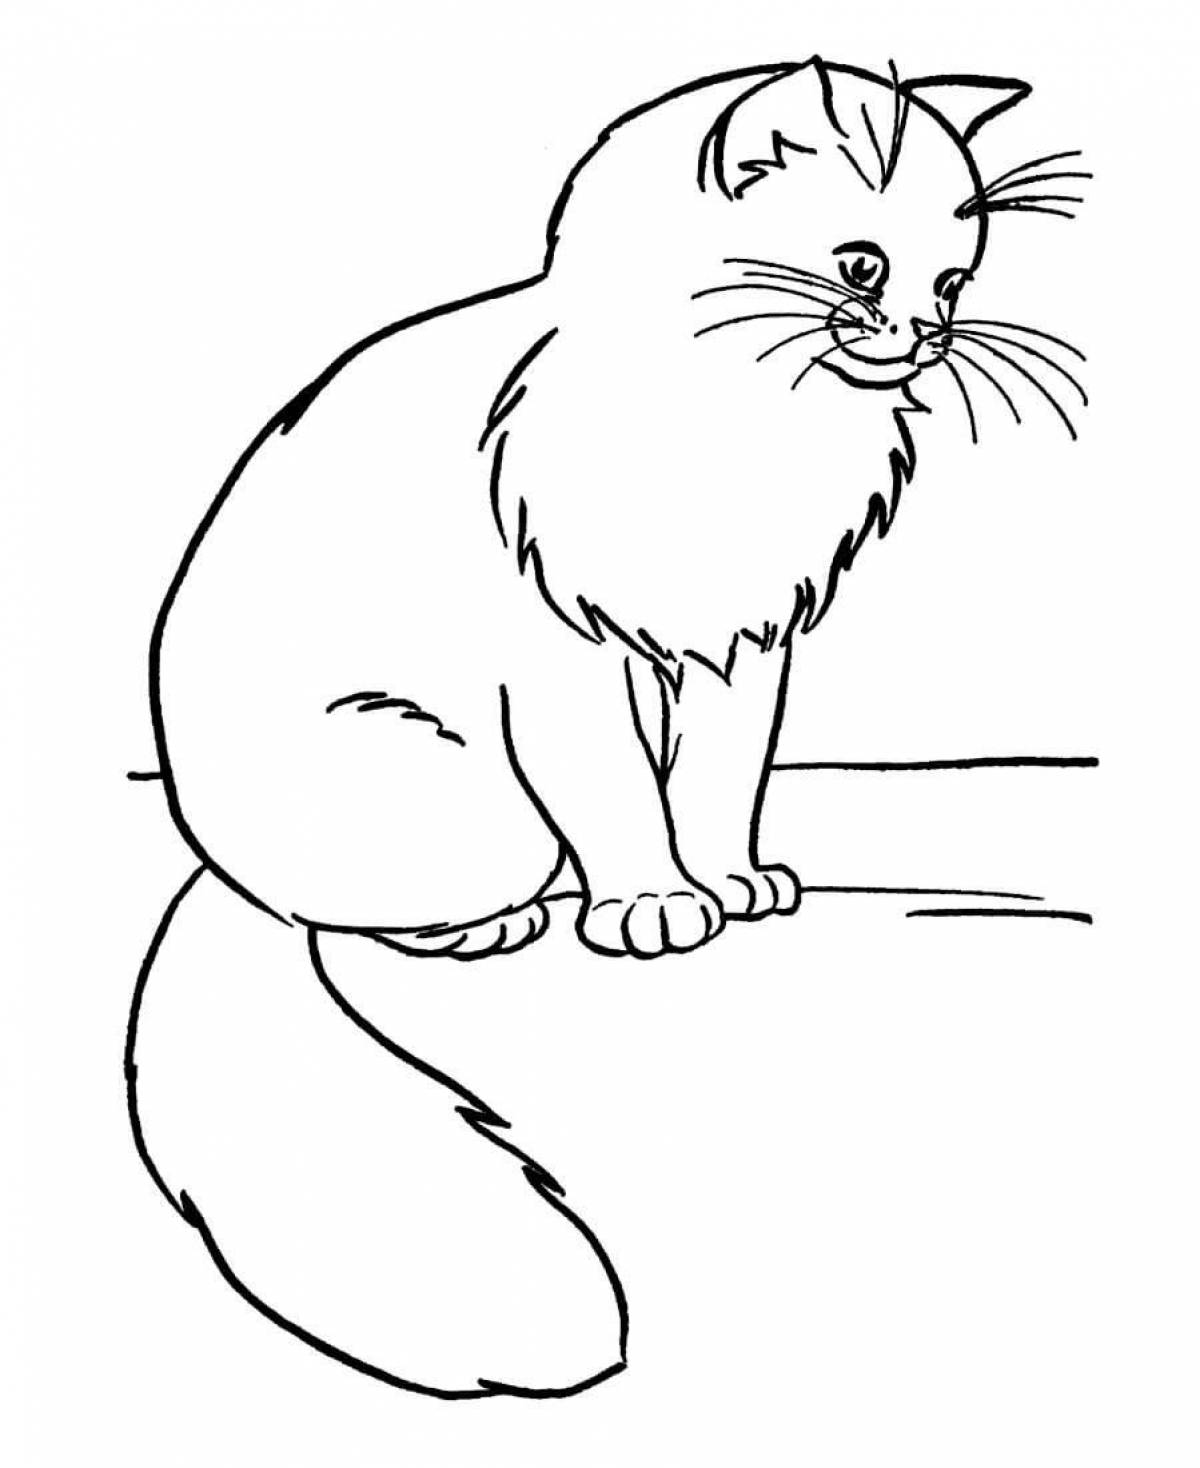 Curious cat coloring pages for kids